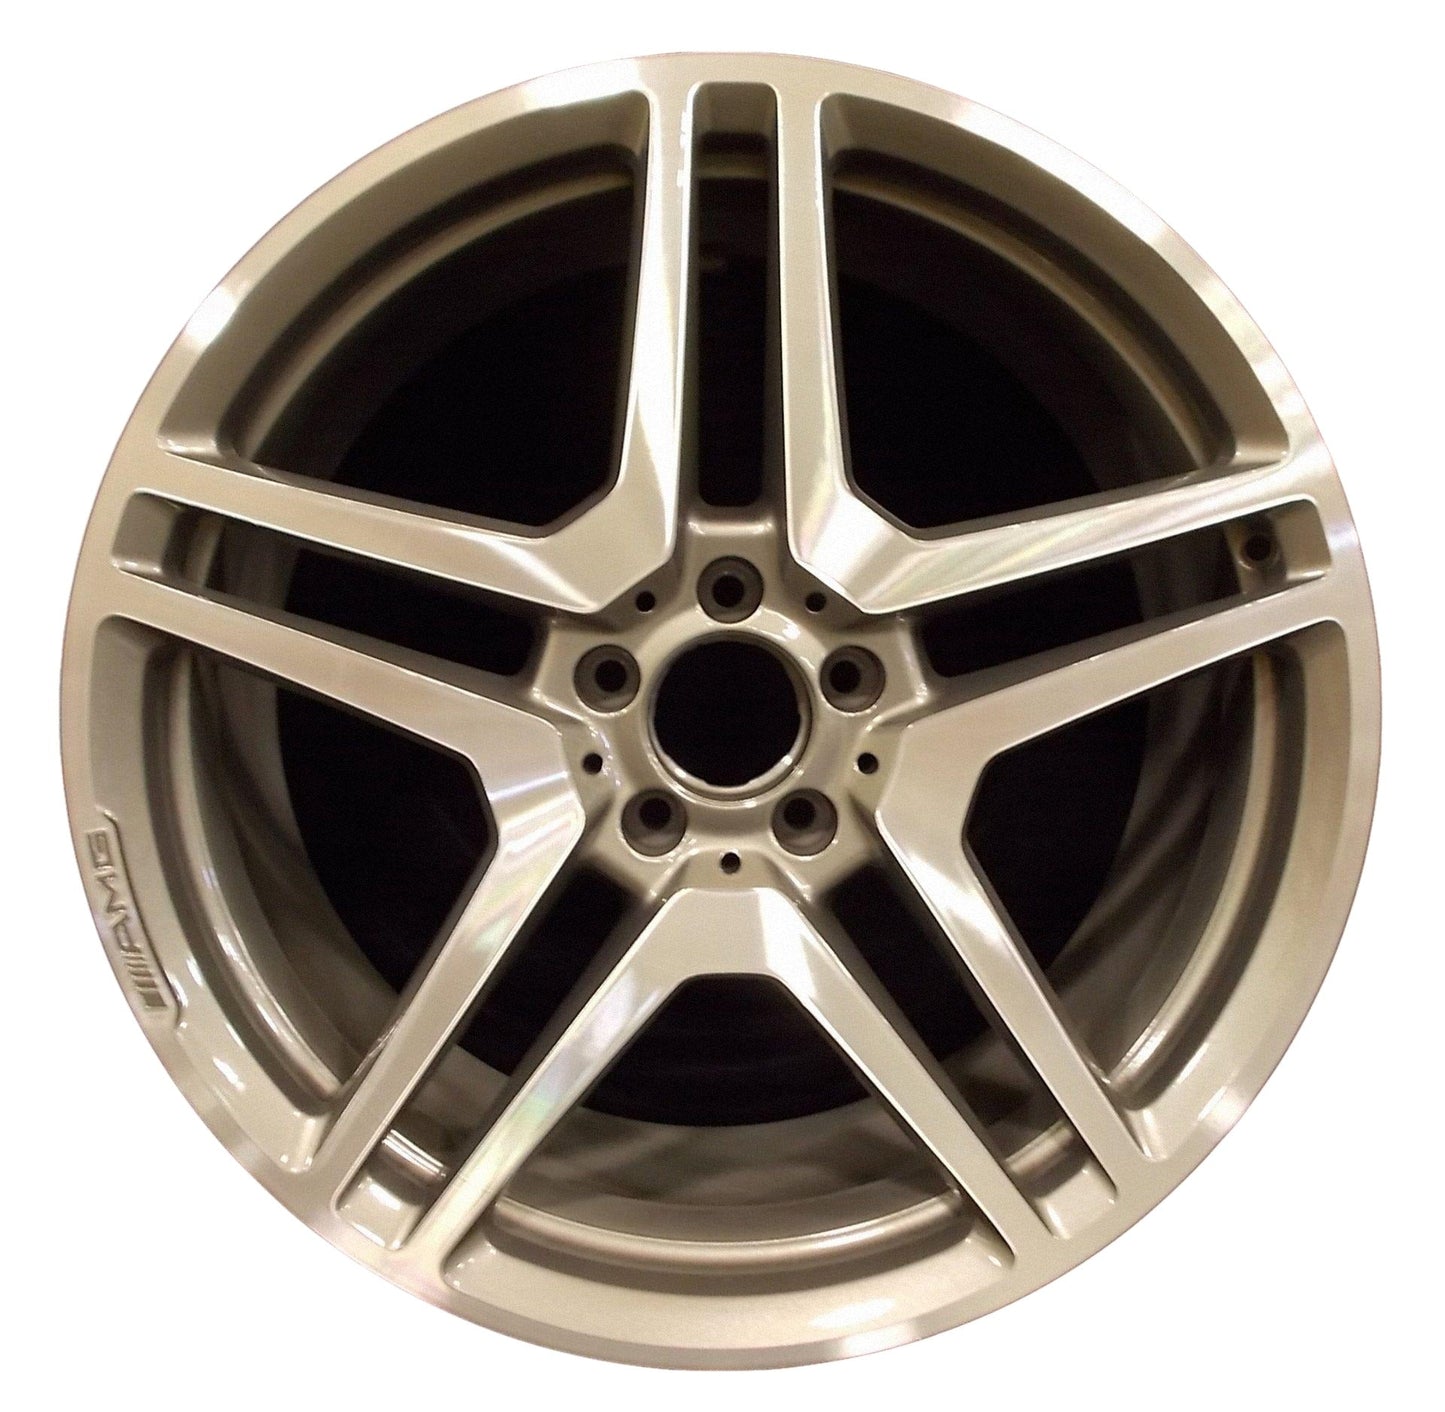 Mercedes CL63  2008, 2009, 2010, 2011, 2012, 2013 Factory OEM Car Wheel Size 20x9.5 Alloy WAO.85052.LC11.MABRT